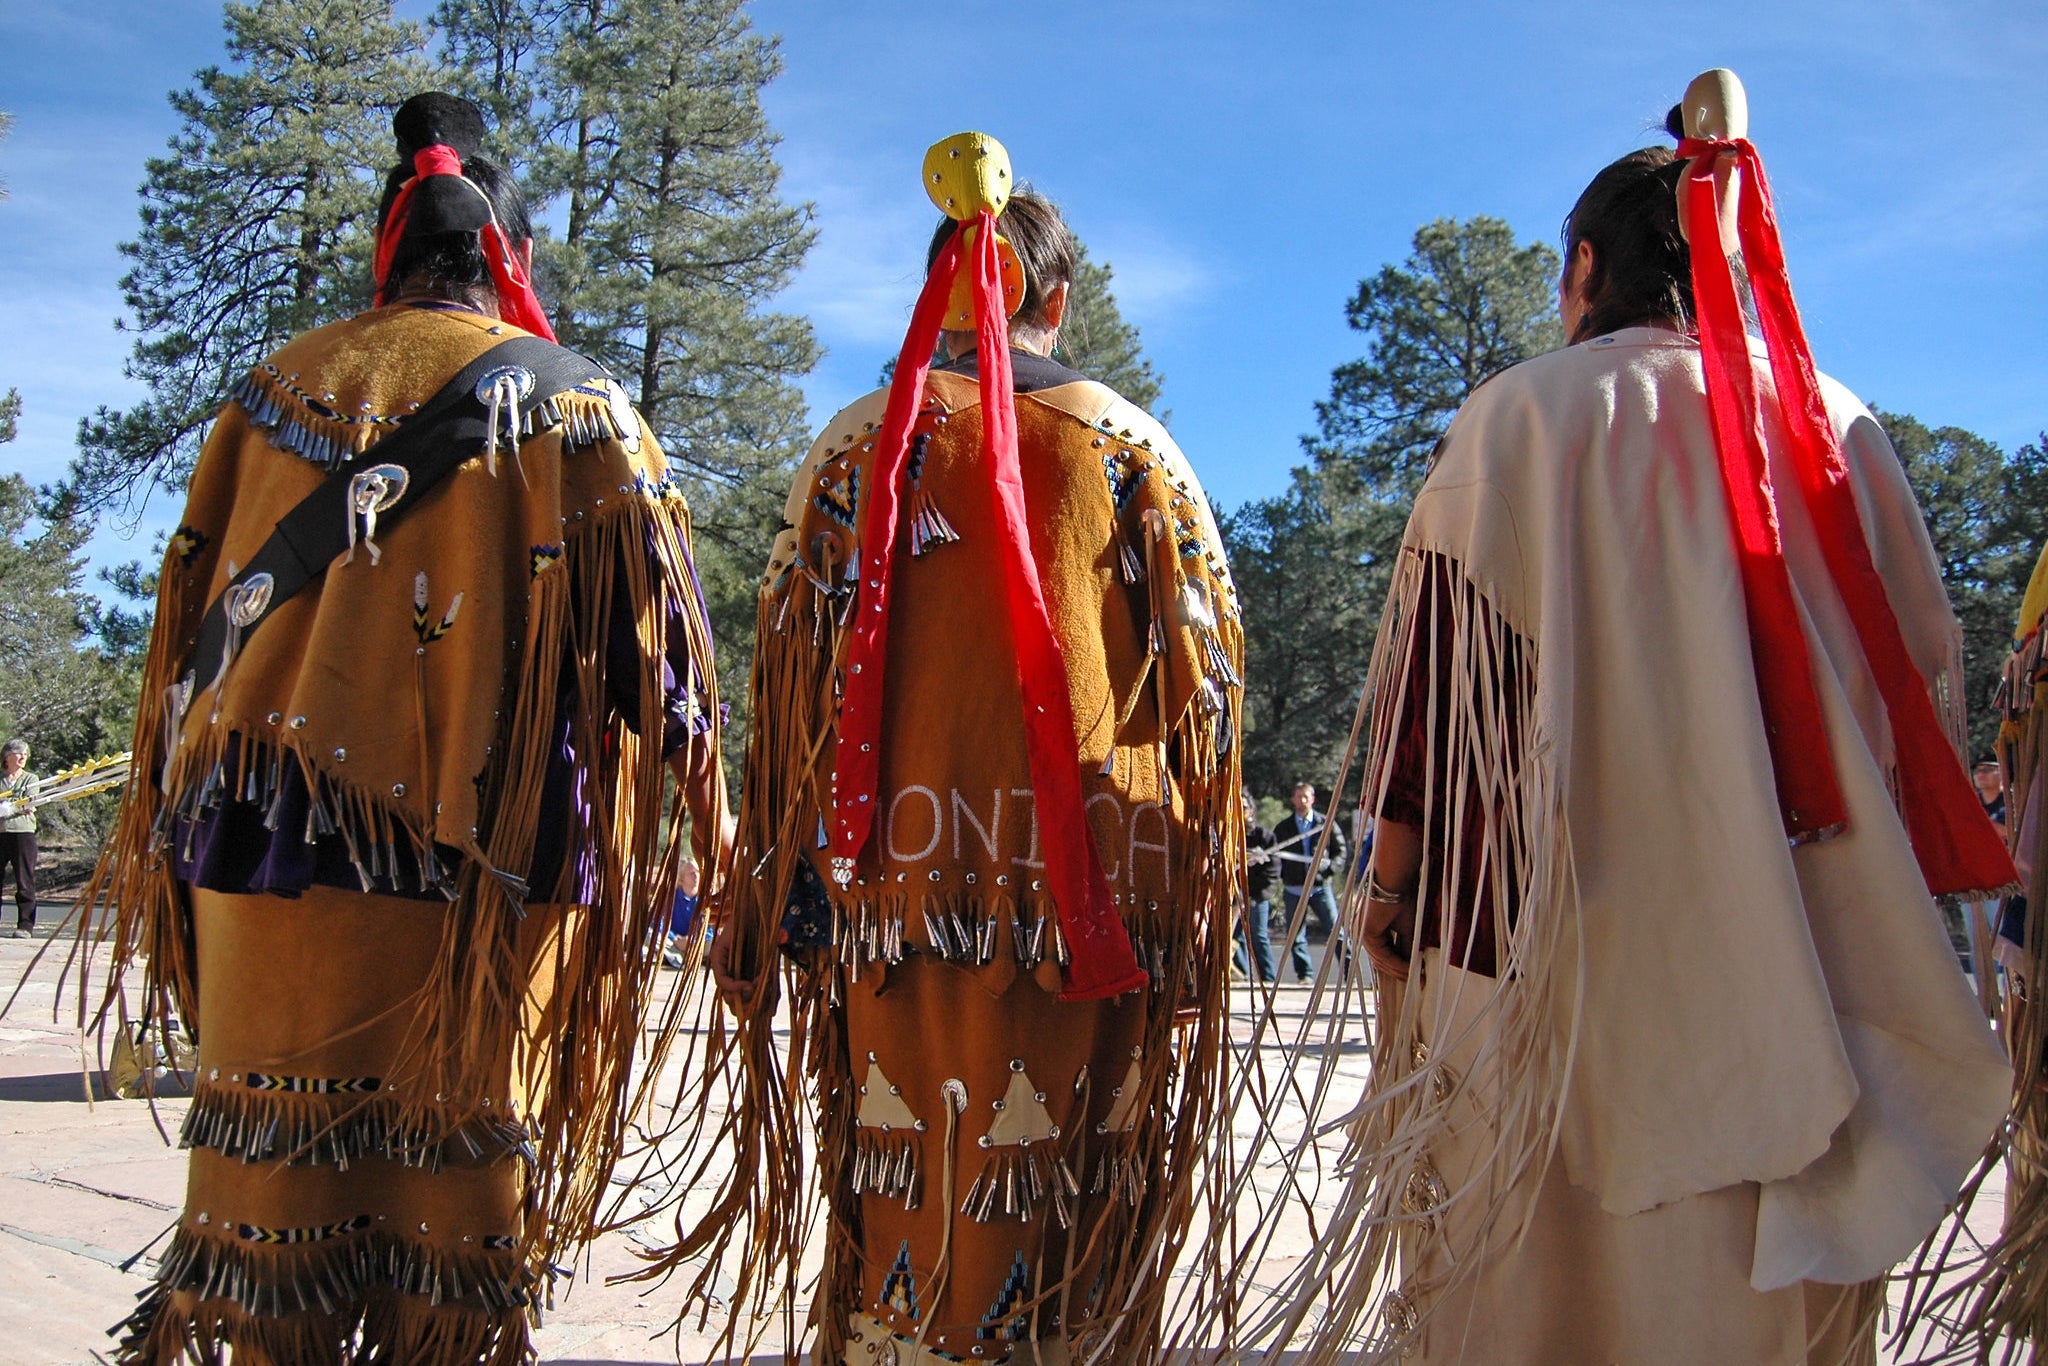 Indigenous people in ceremonial dress are seen gathered in front of pine trees.